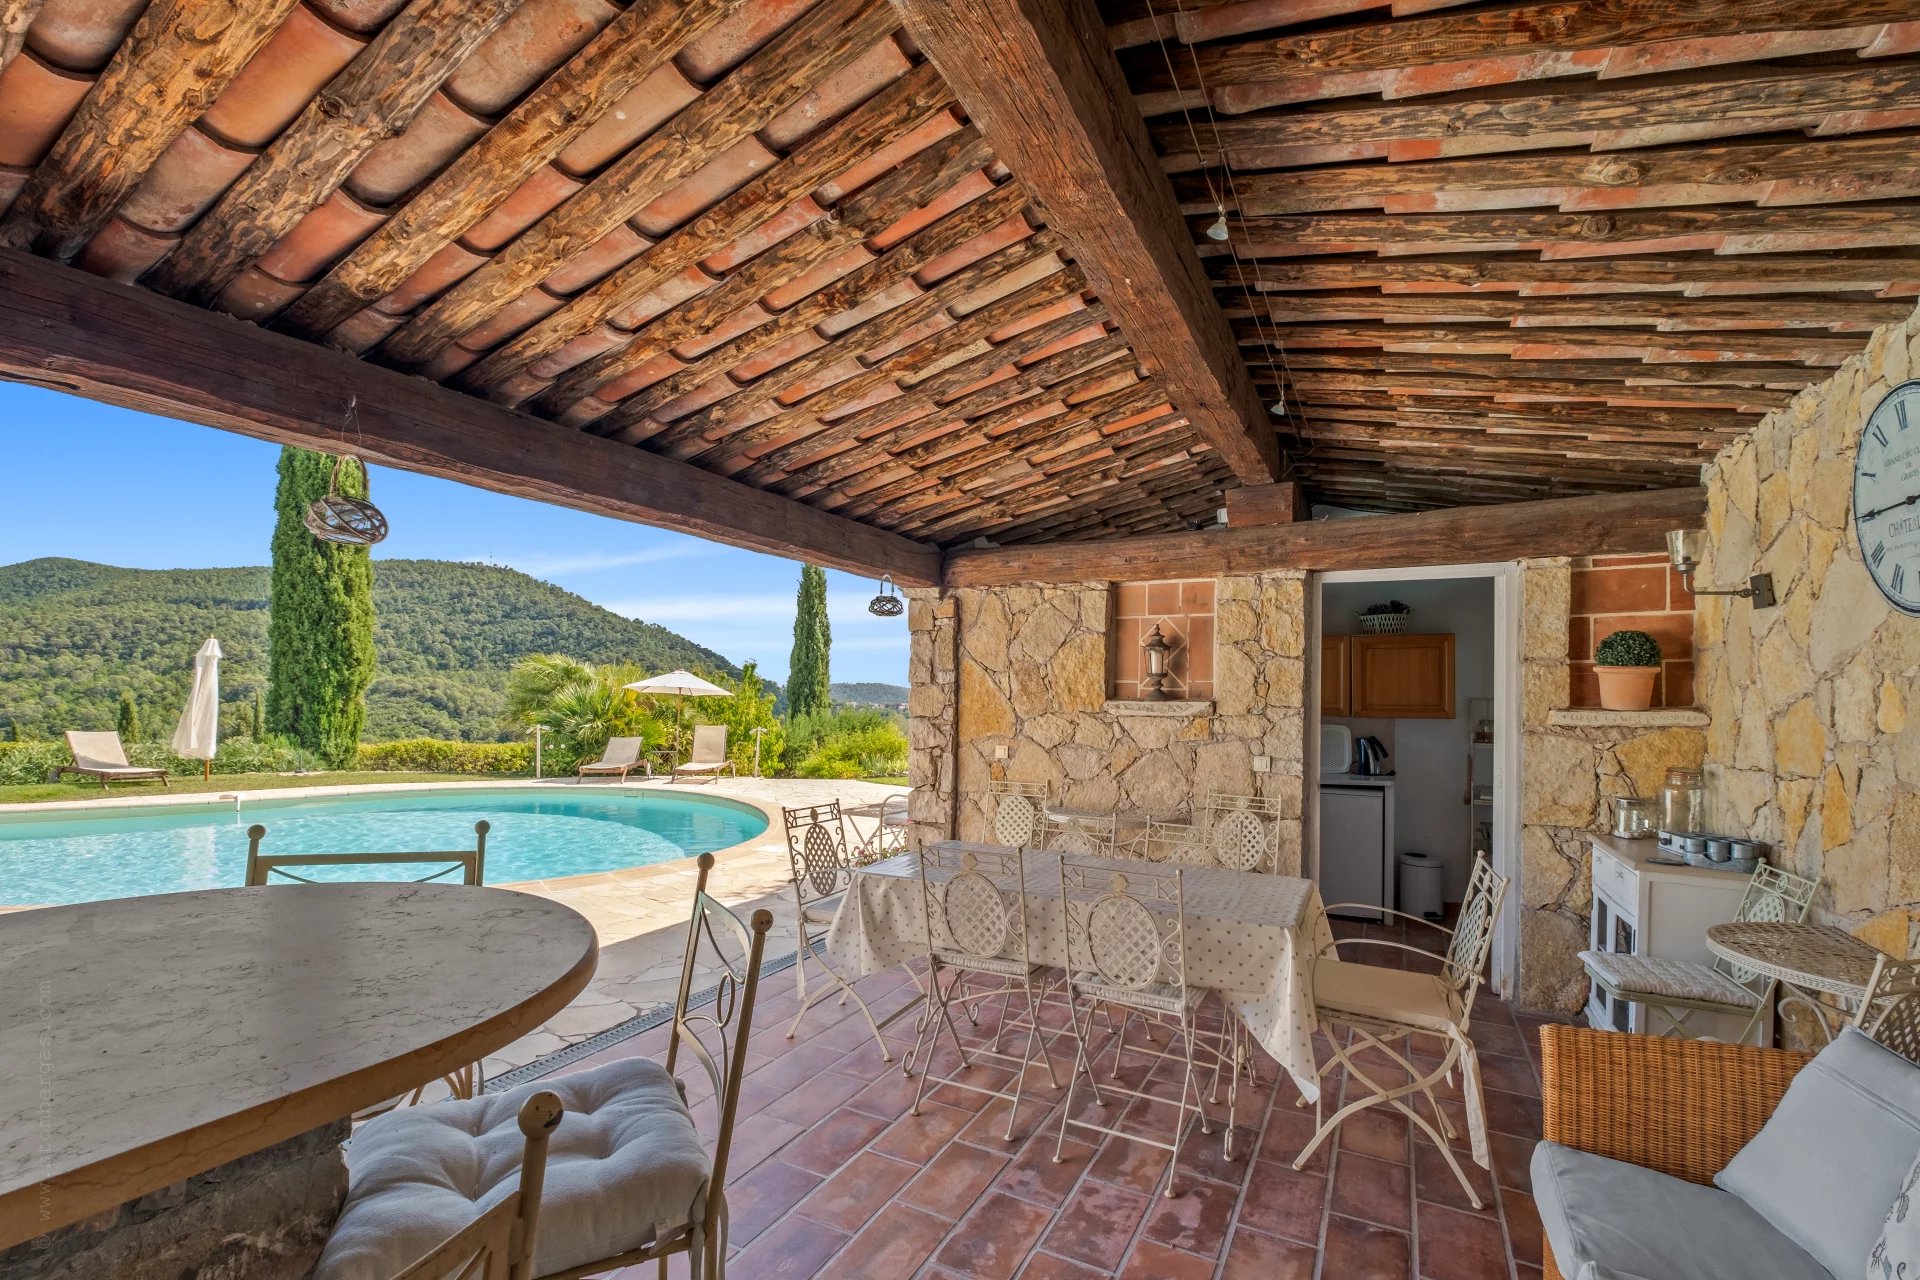 Great 5 bedroom villa with exceptional view - Bargemon